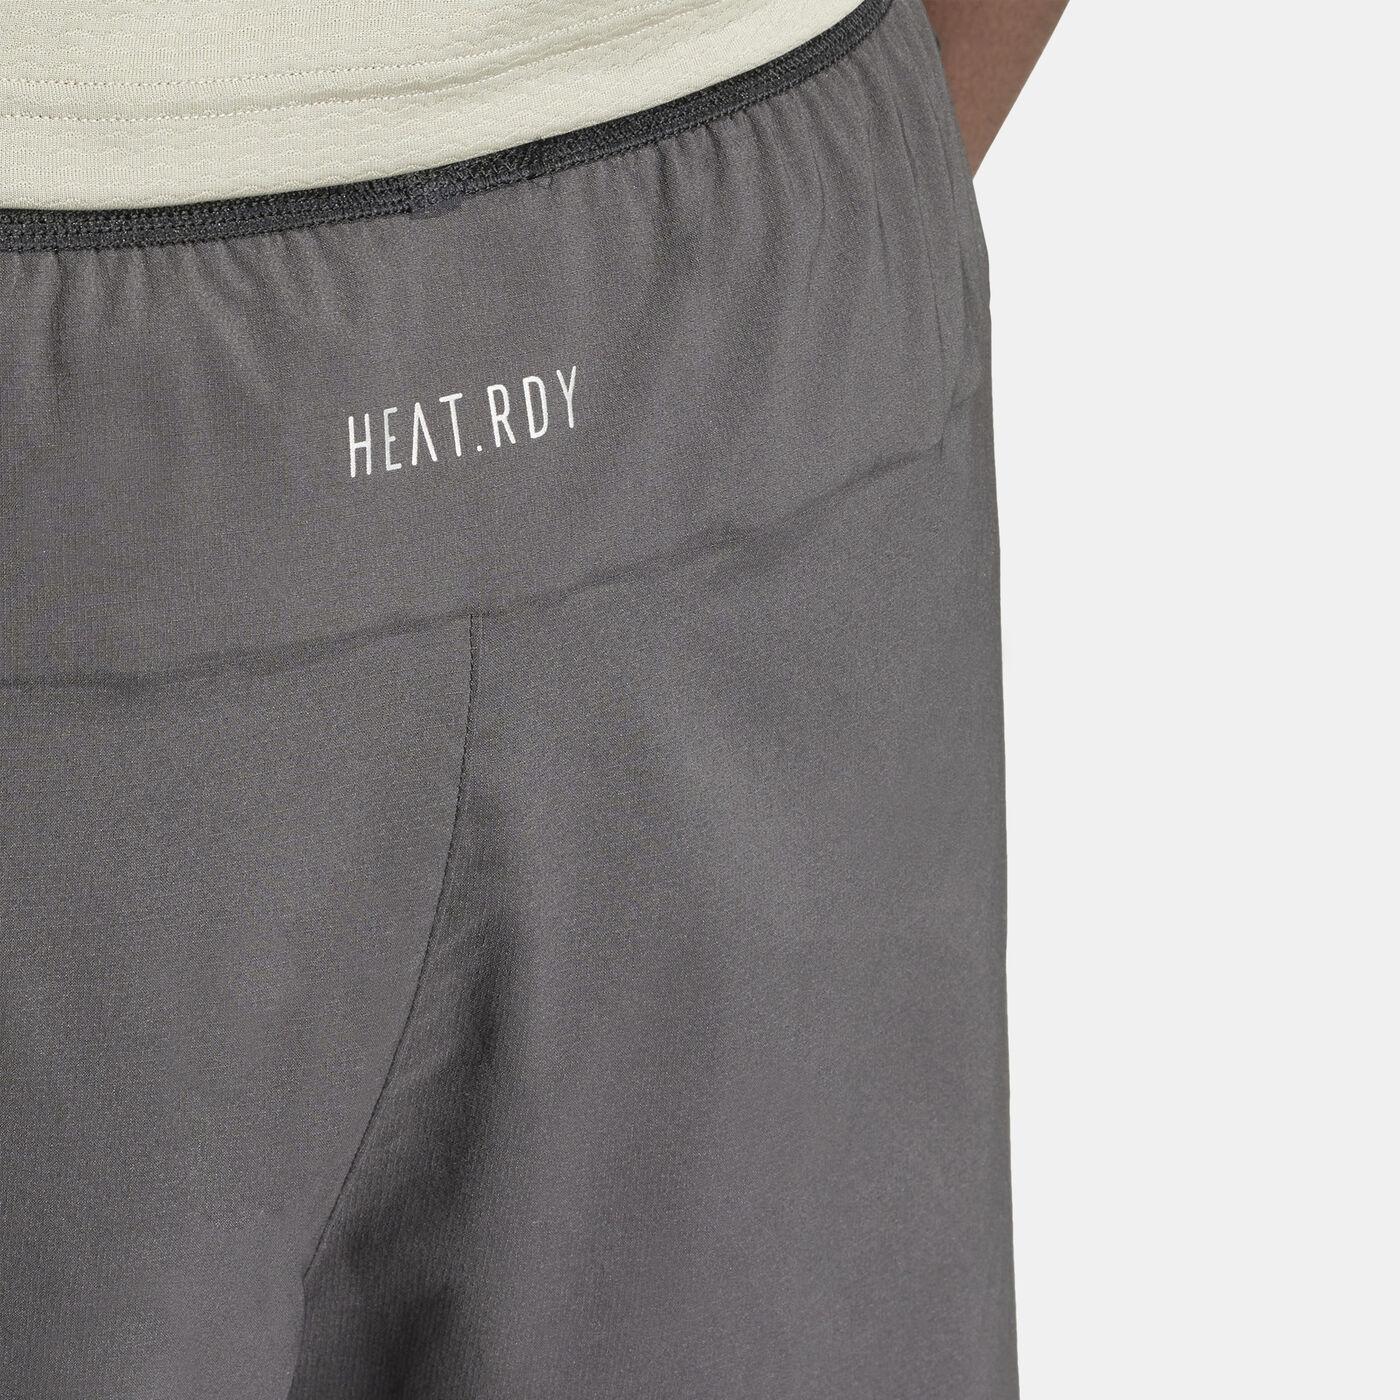 Men's HIIT Workout HEAT.RDY 2-in-1 Training Shorts